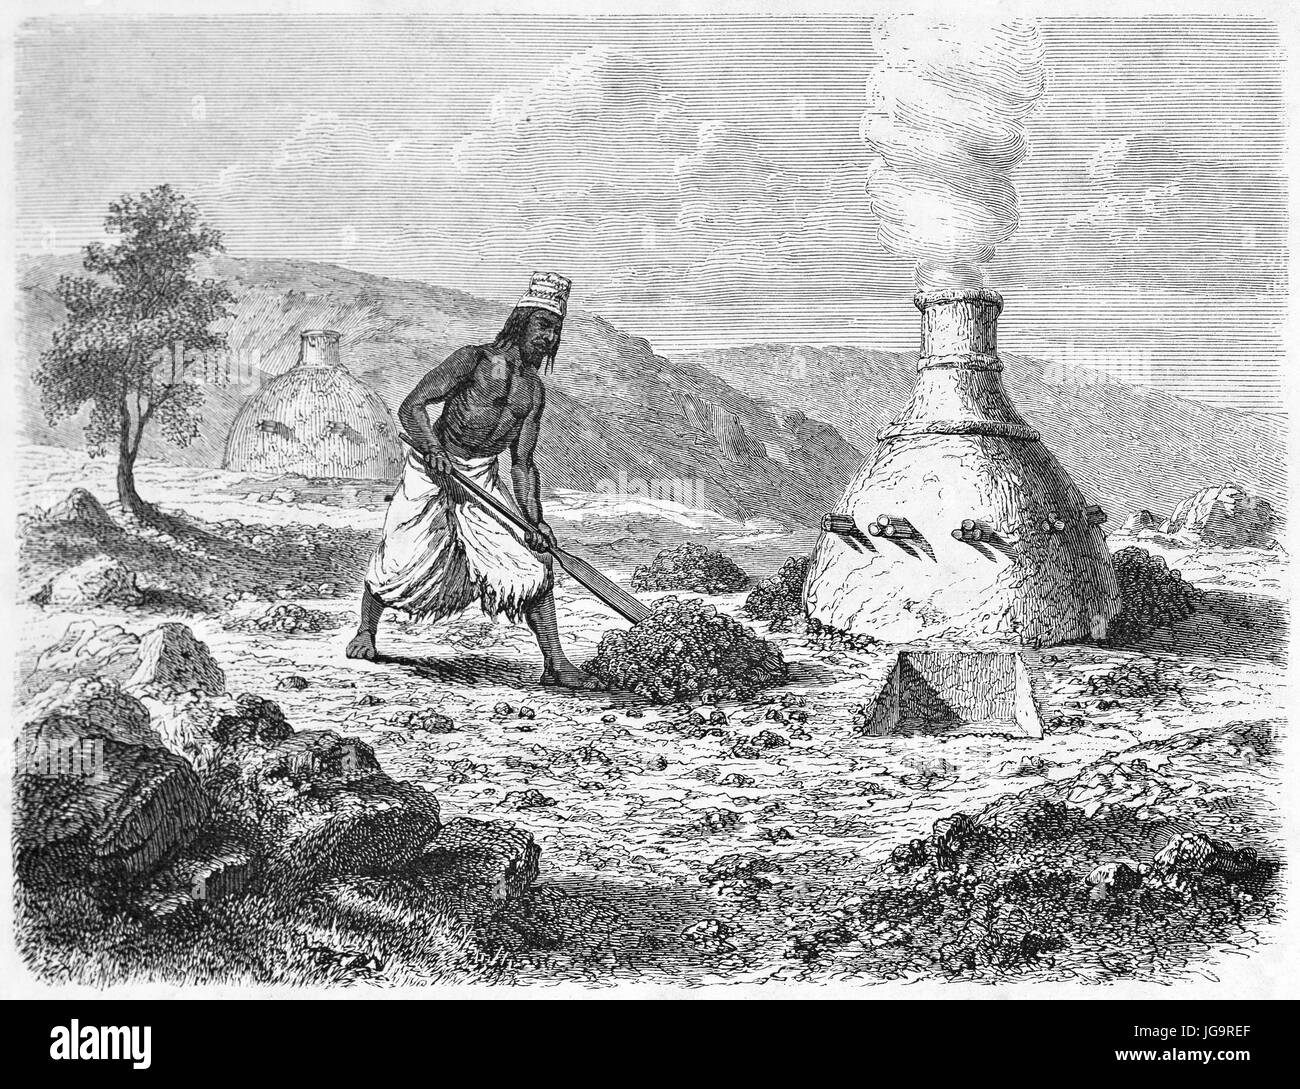 Old illustration of African native extracting iron from minerals in a furnace. Created by Hadamard after Lambert, published on Le Tour du Monde, Paris Stock Photo